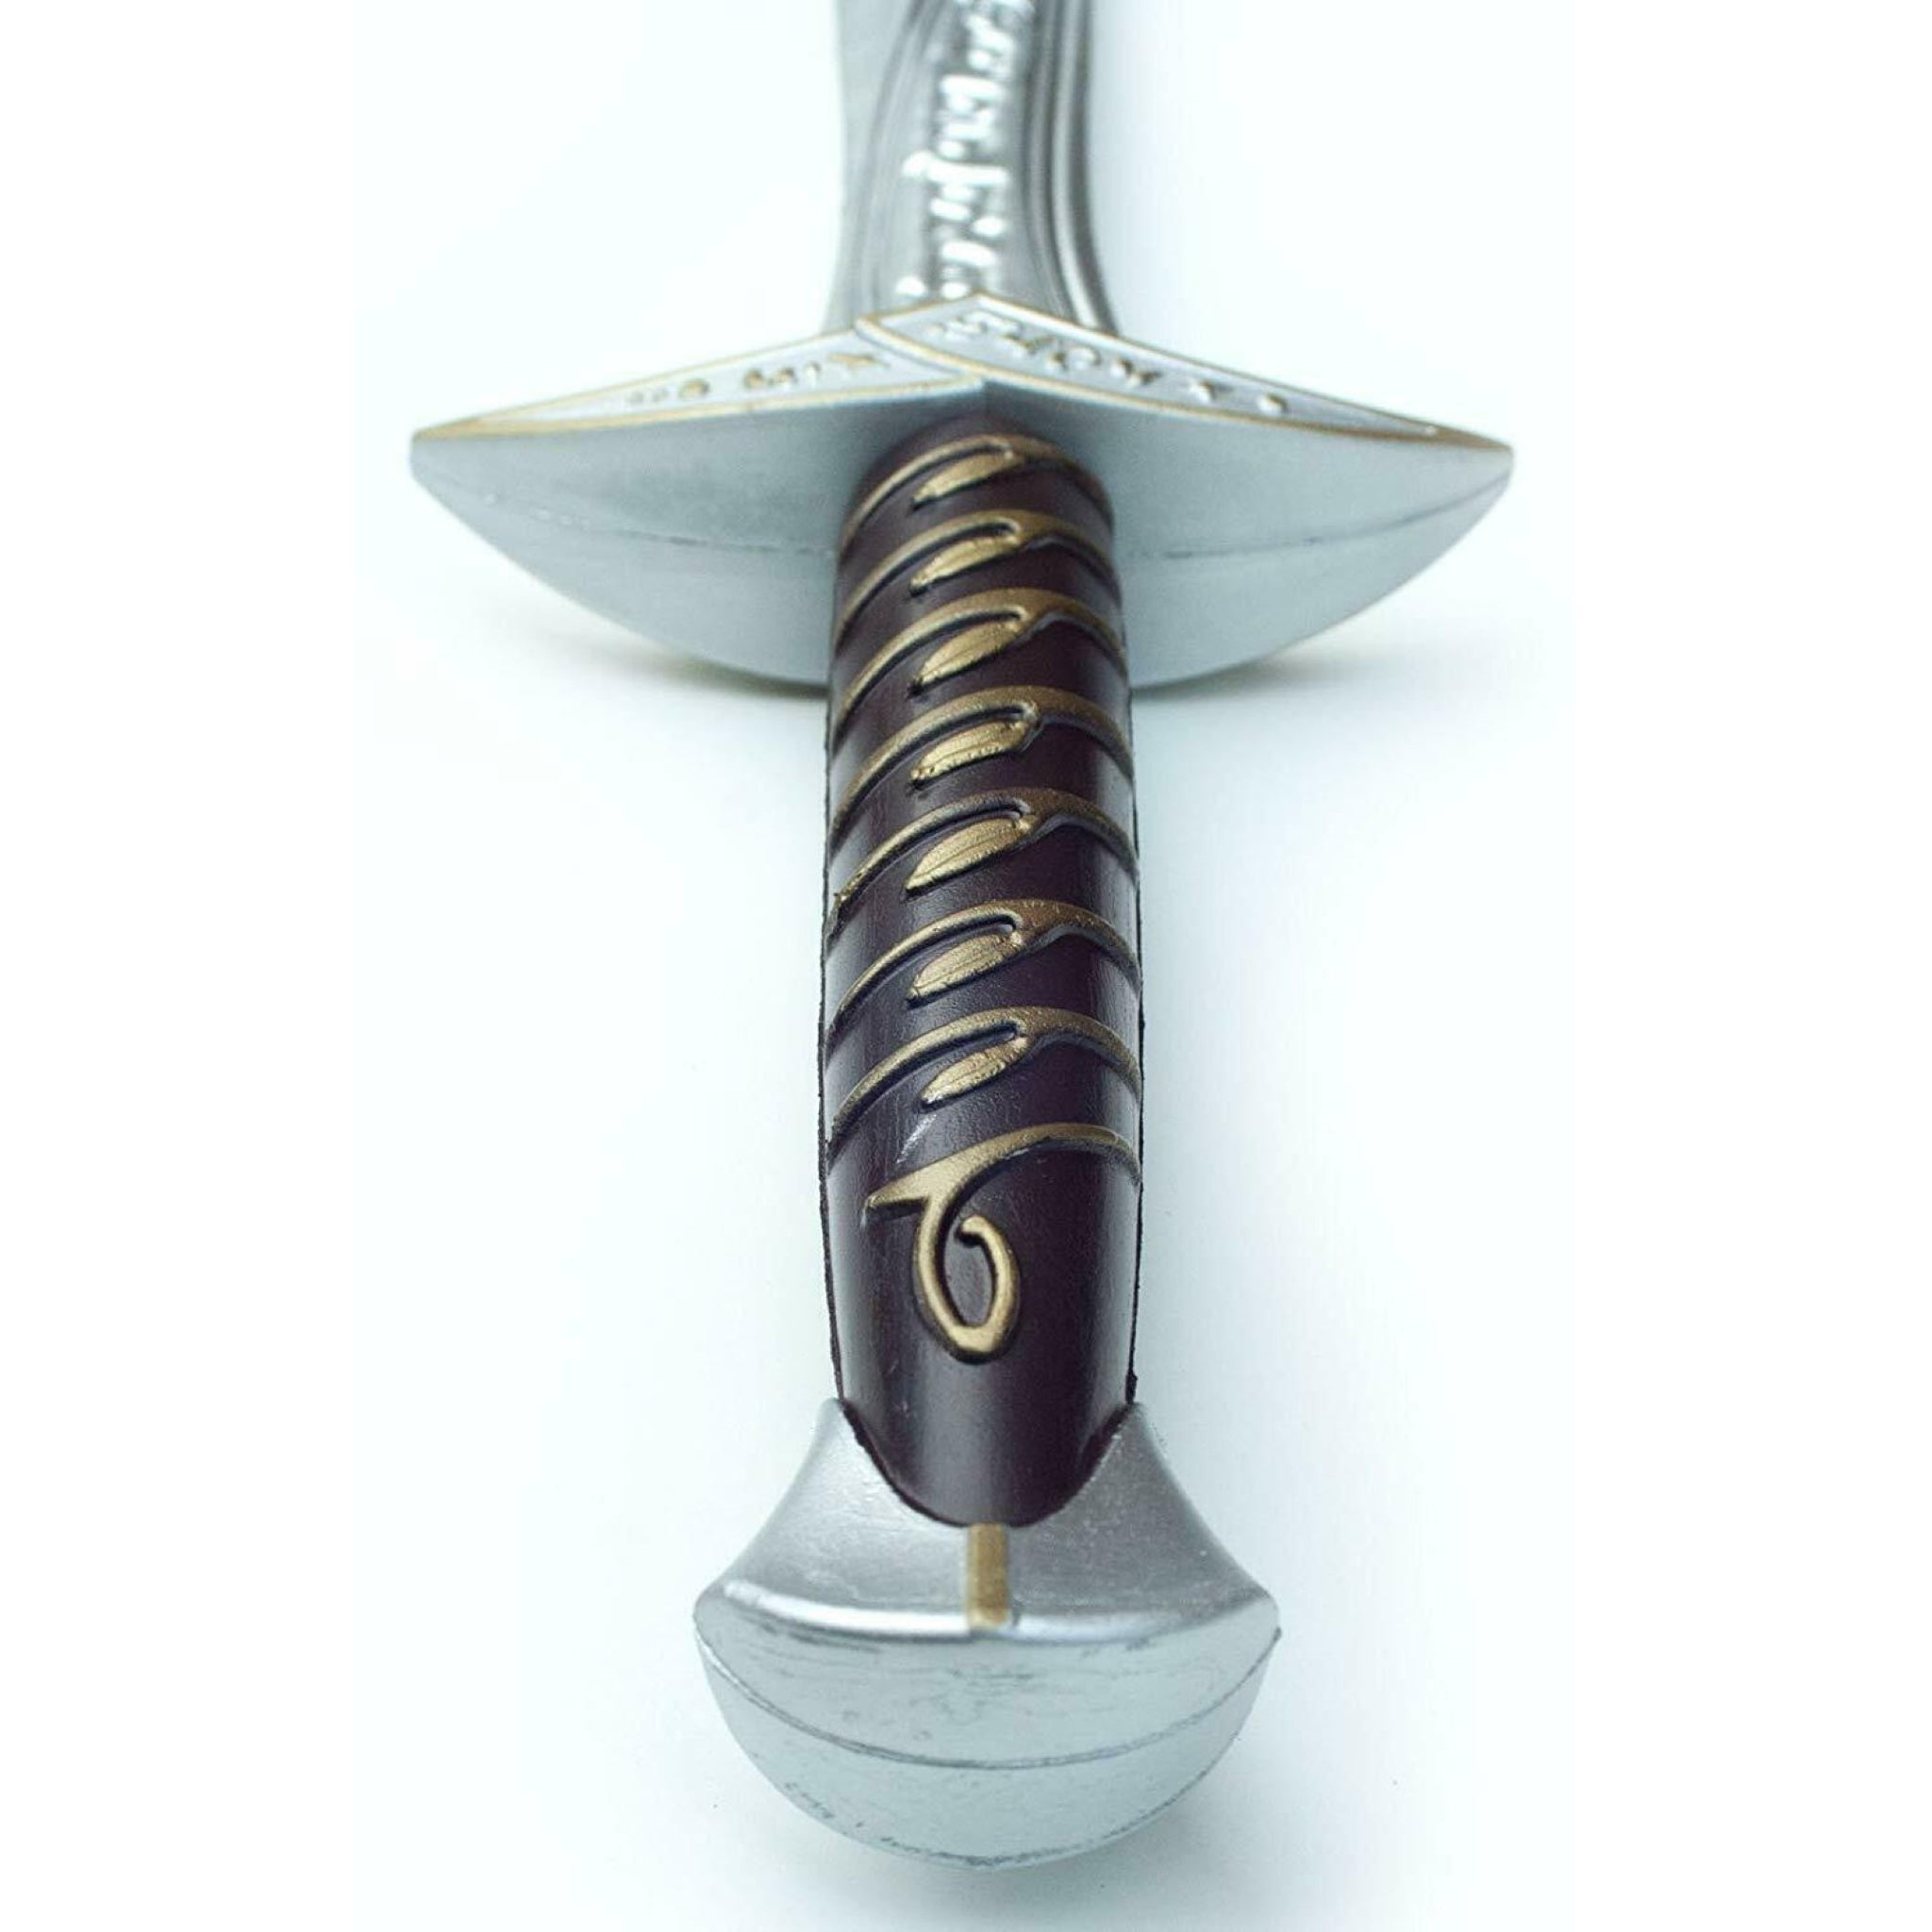 Sting Sword The Hobbit Lord Of The Rings 70CM Foam Replica Cosplay